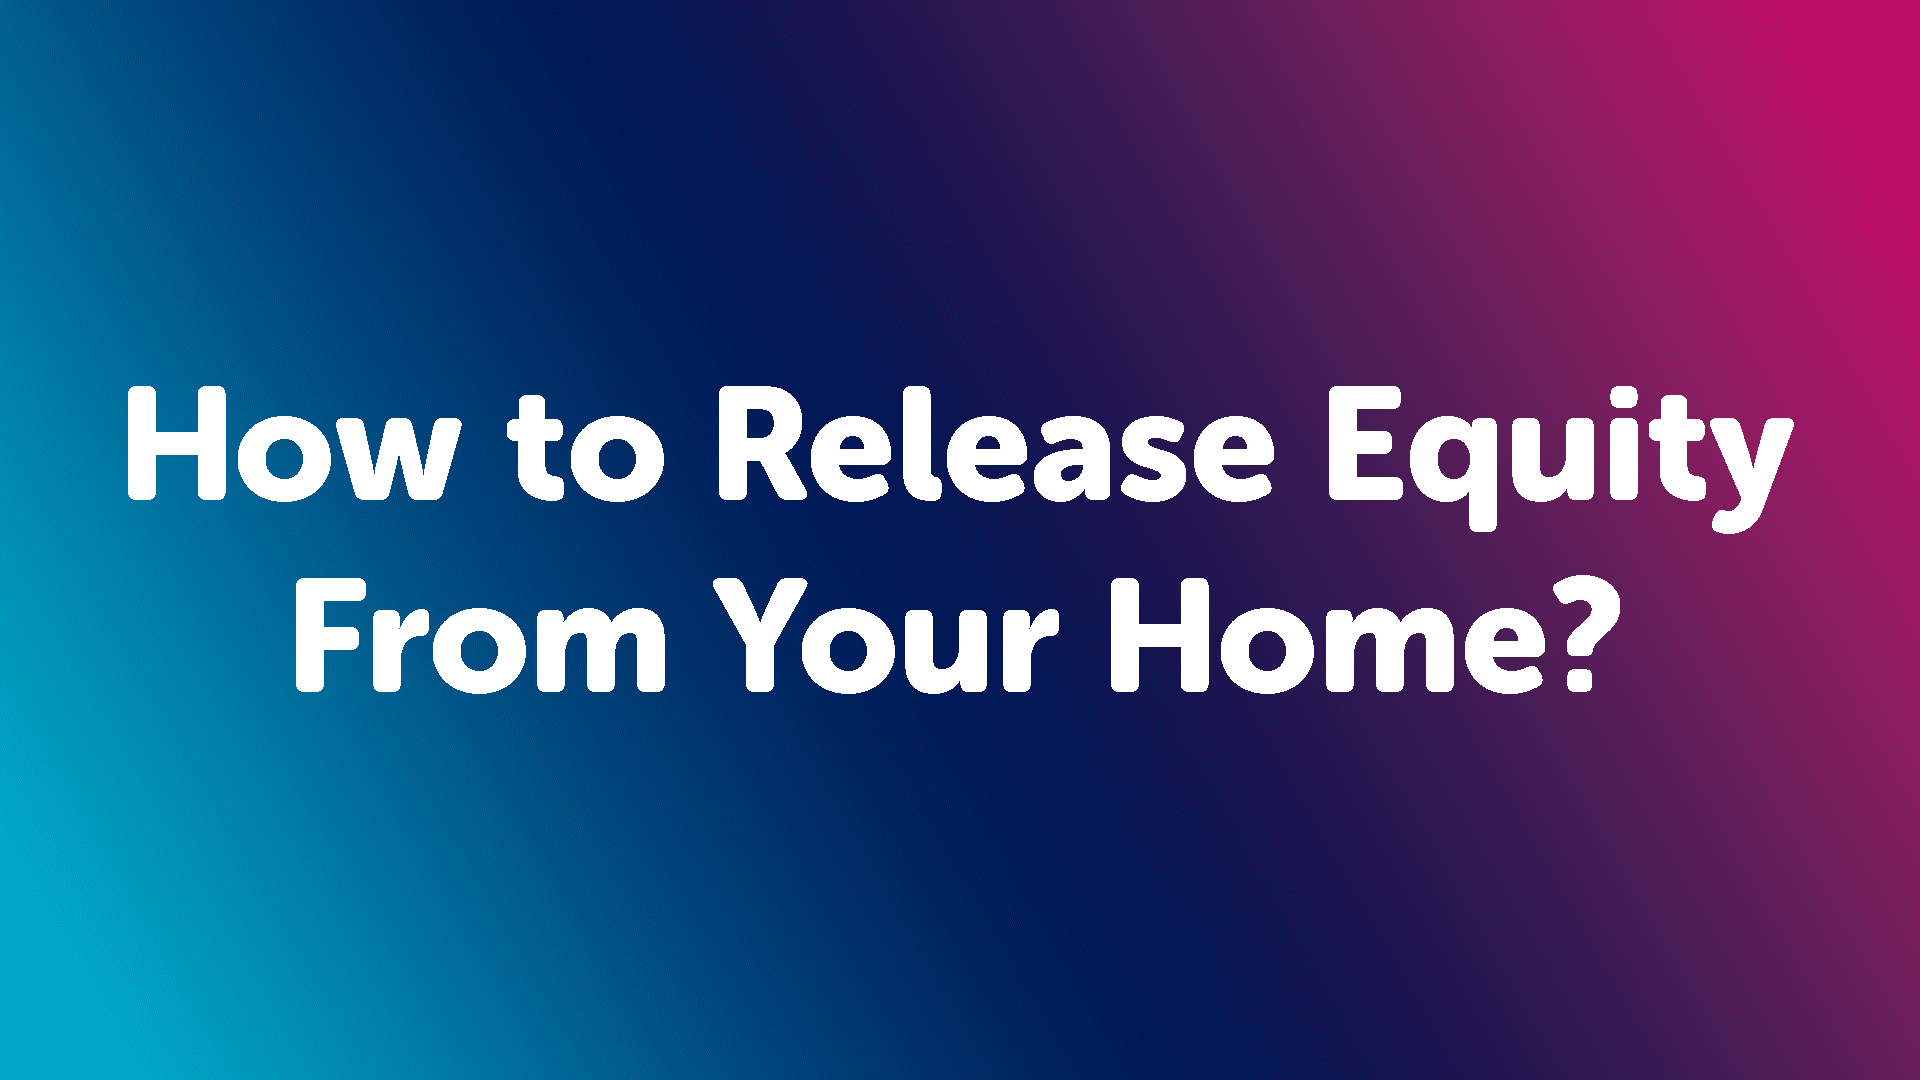 How to Release Equity from your Home